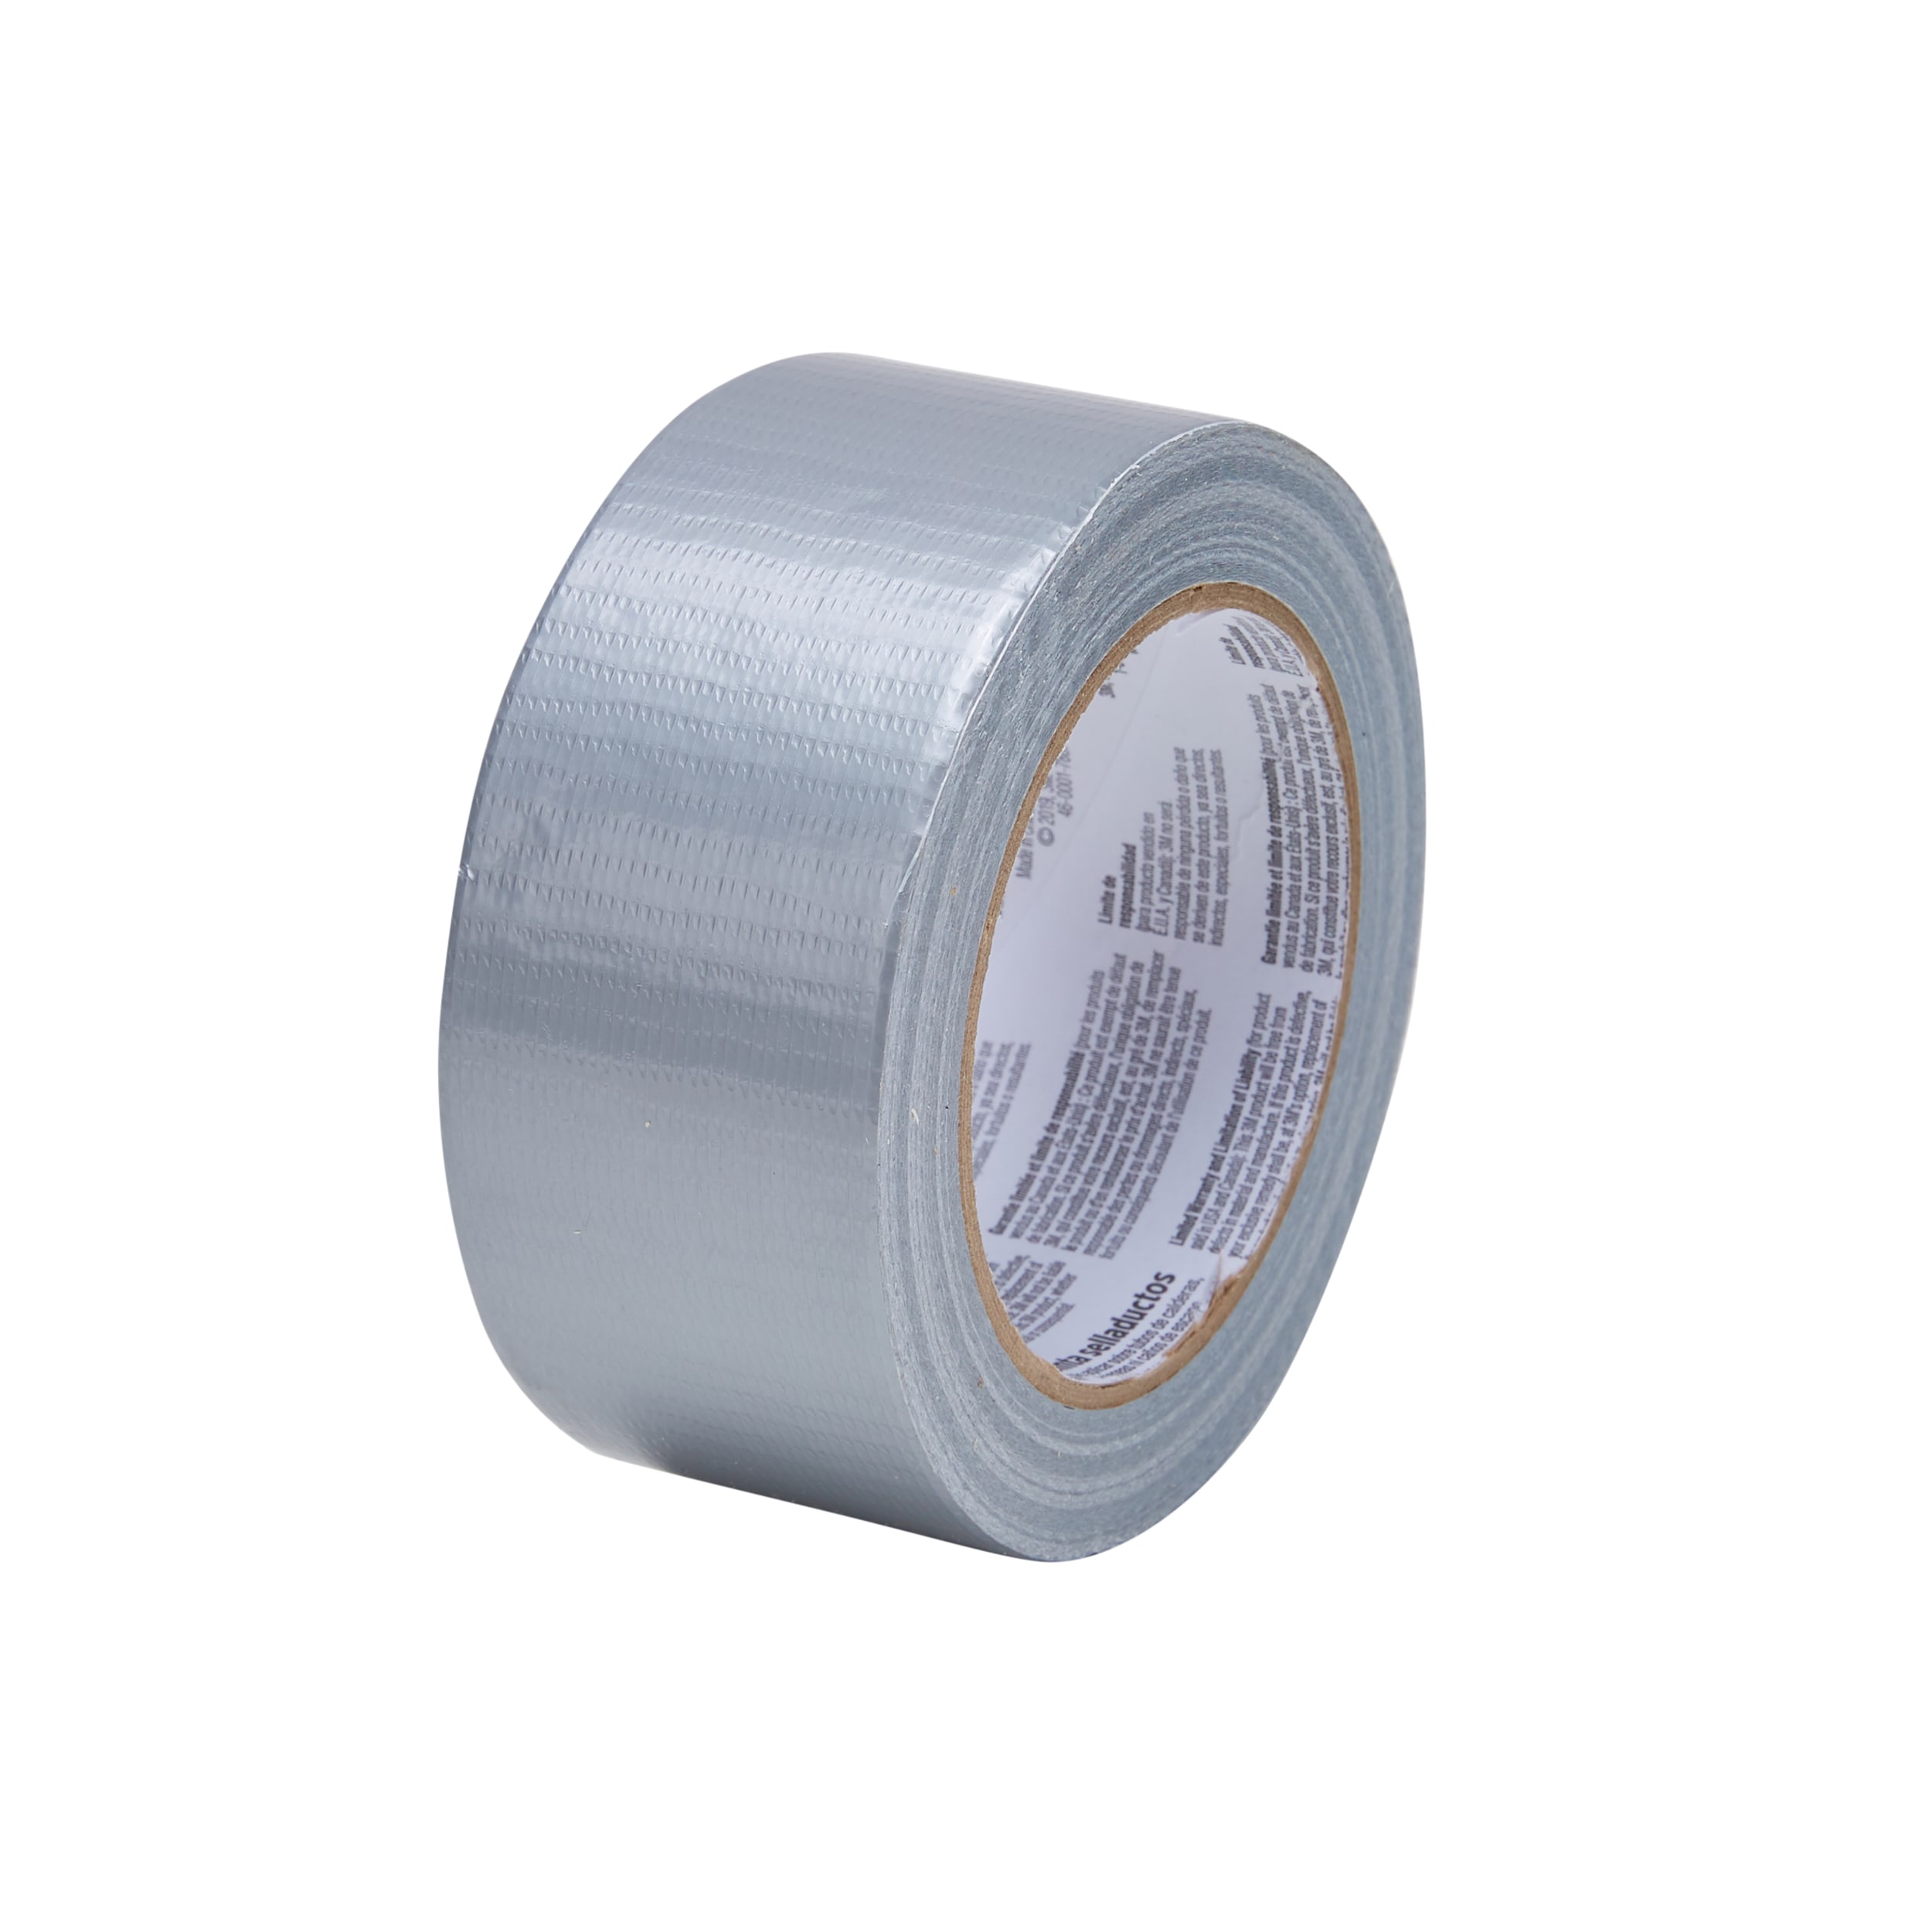 K Tool 73560 Duct Tape, 2 x 60 Yards, All Purpose, Gray, Sold  Individually, Made in U.S.A.